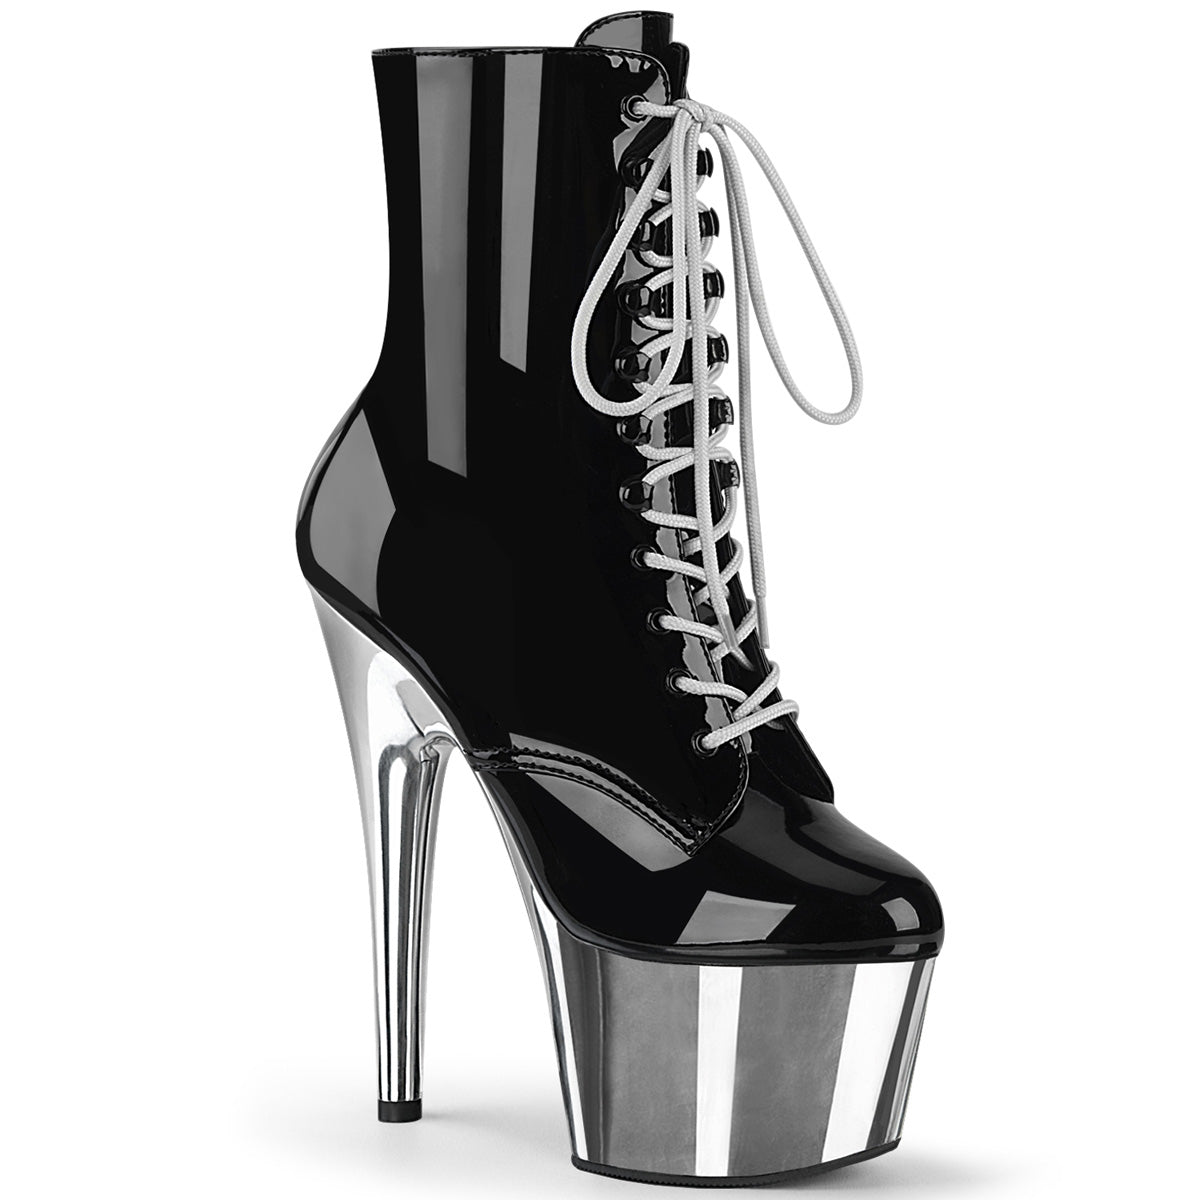 ADORE-1020 7" Heel Black Silver Exotic Dancing Ankle Boots